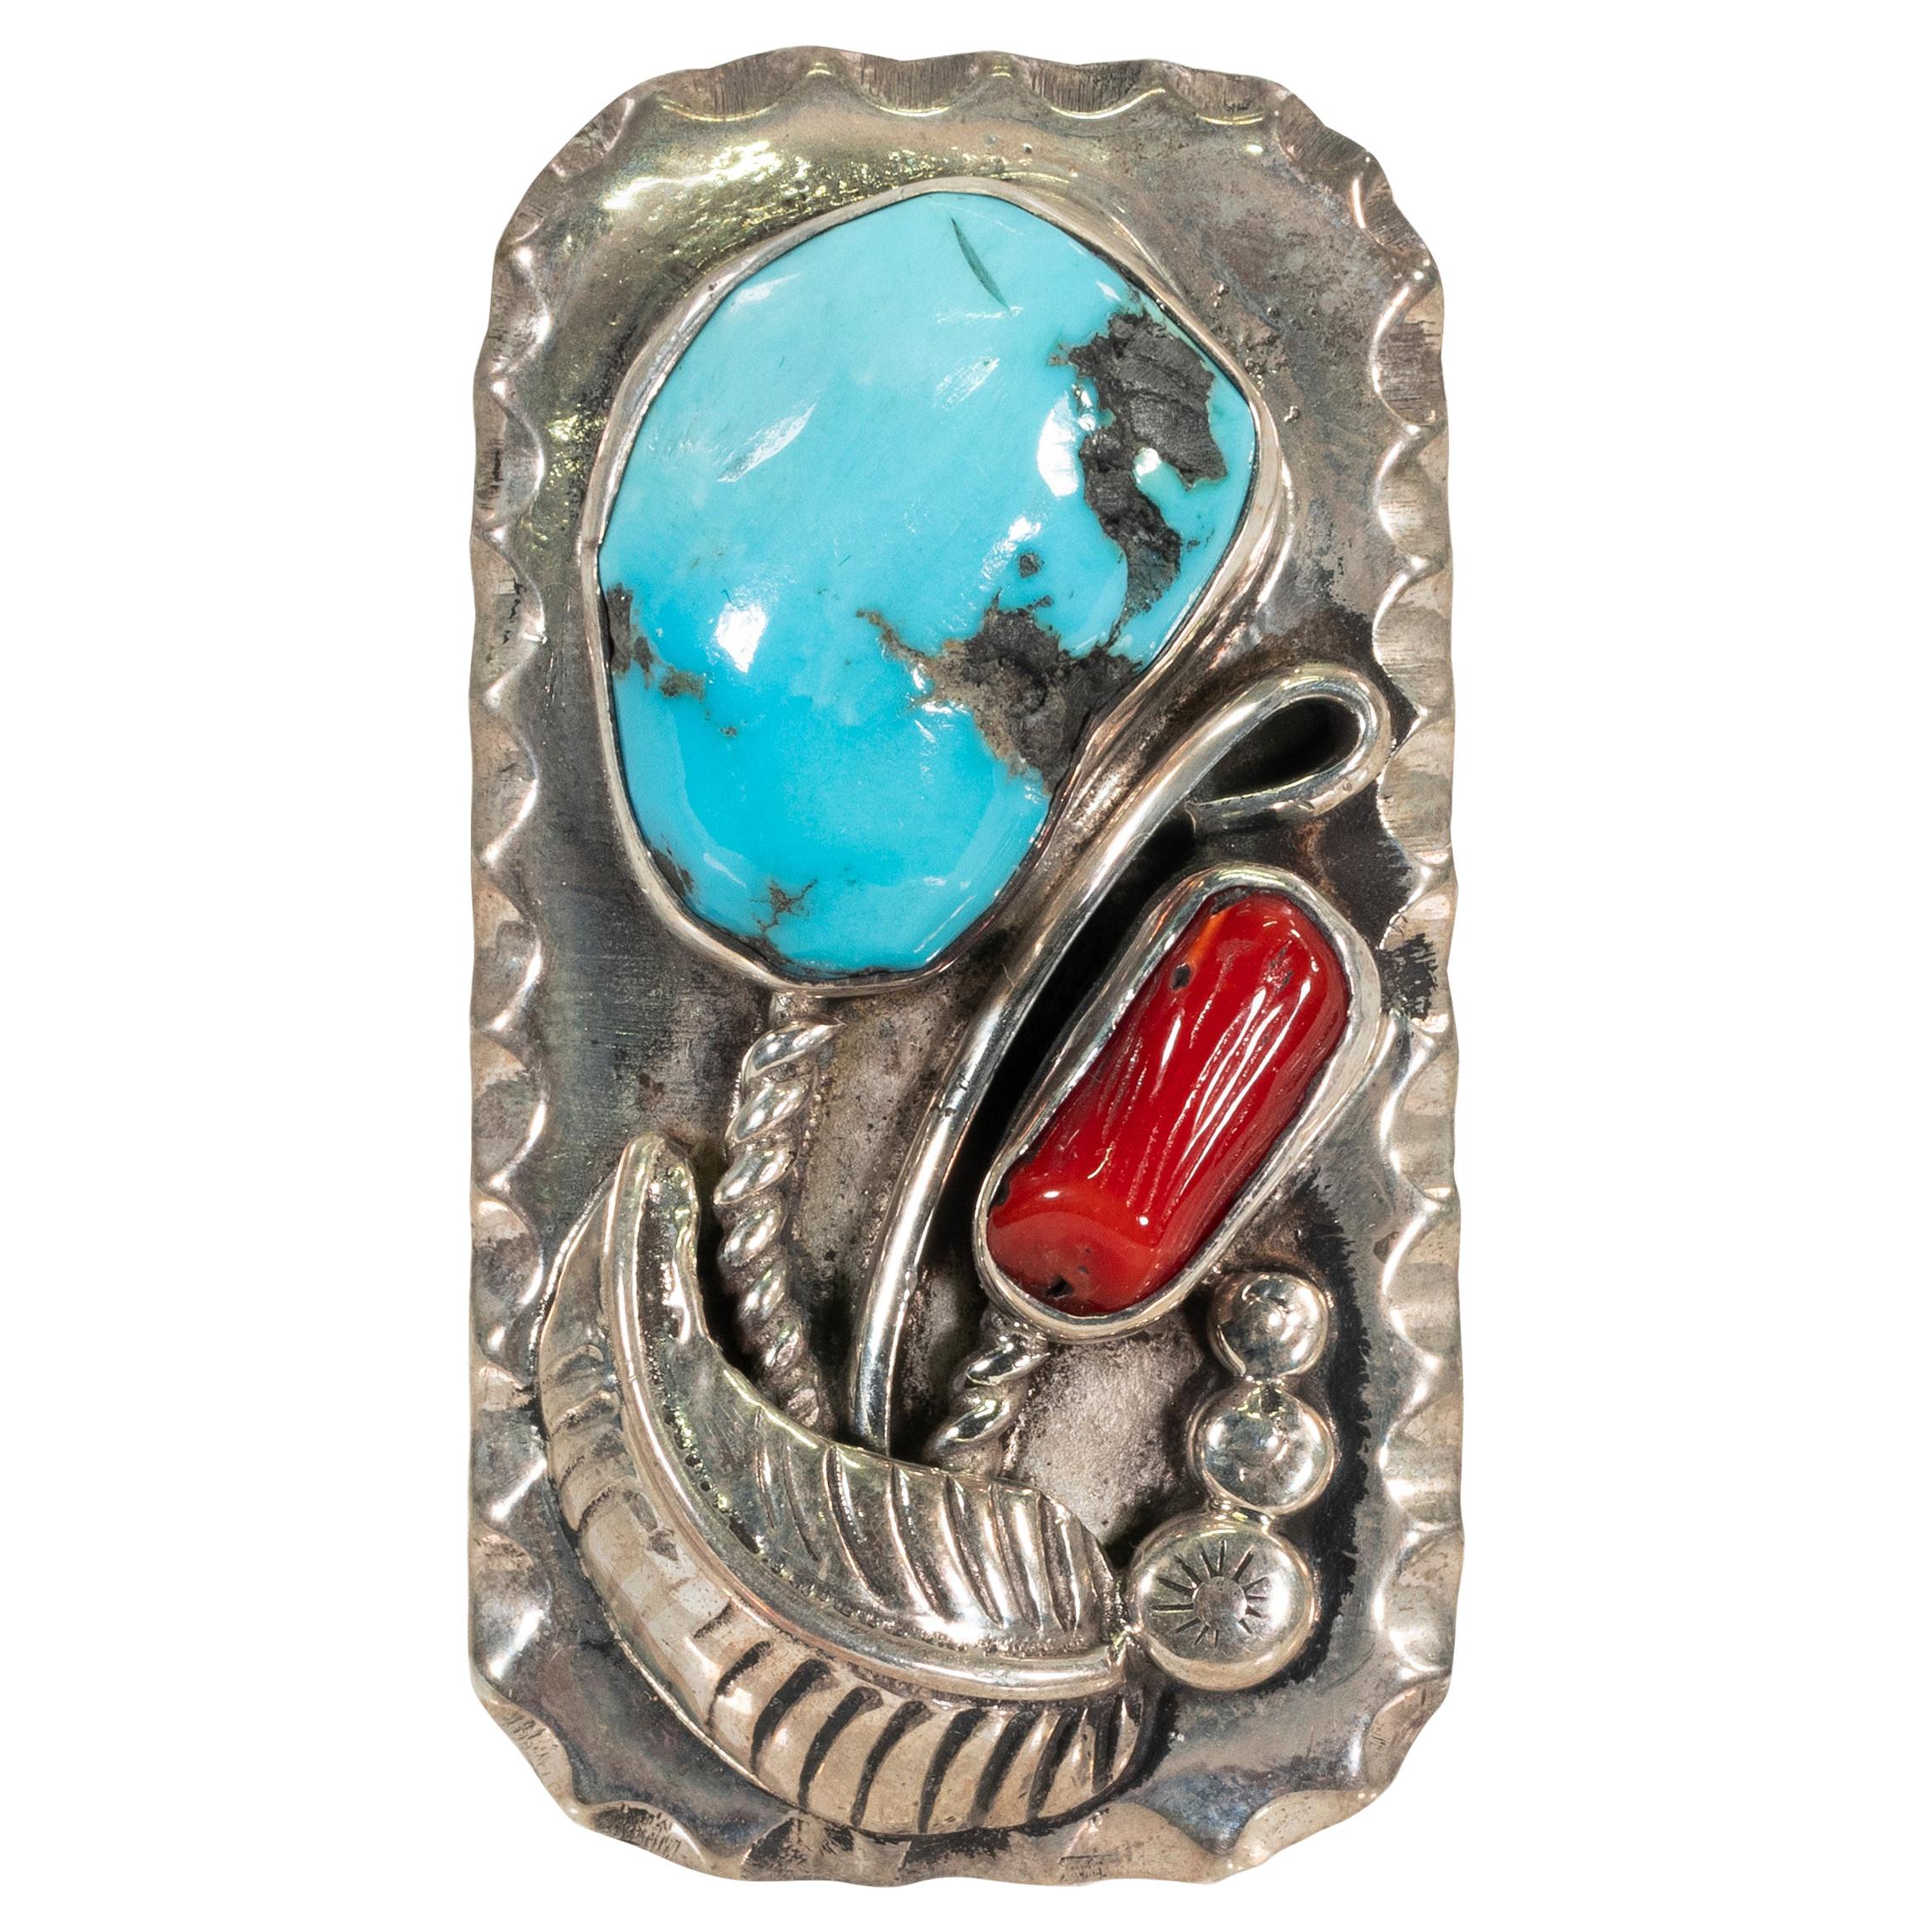 Details about     Turquoise and Coral Baby or Small Ladies Ring in Sterling Handcrafted Navajo 